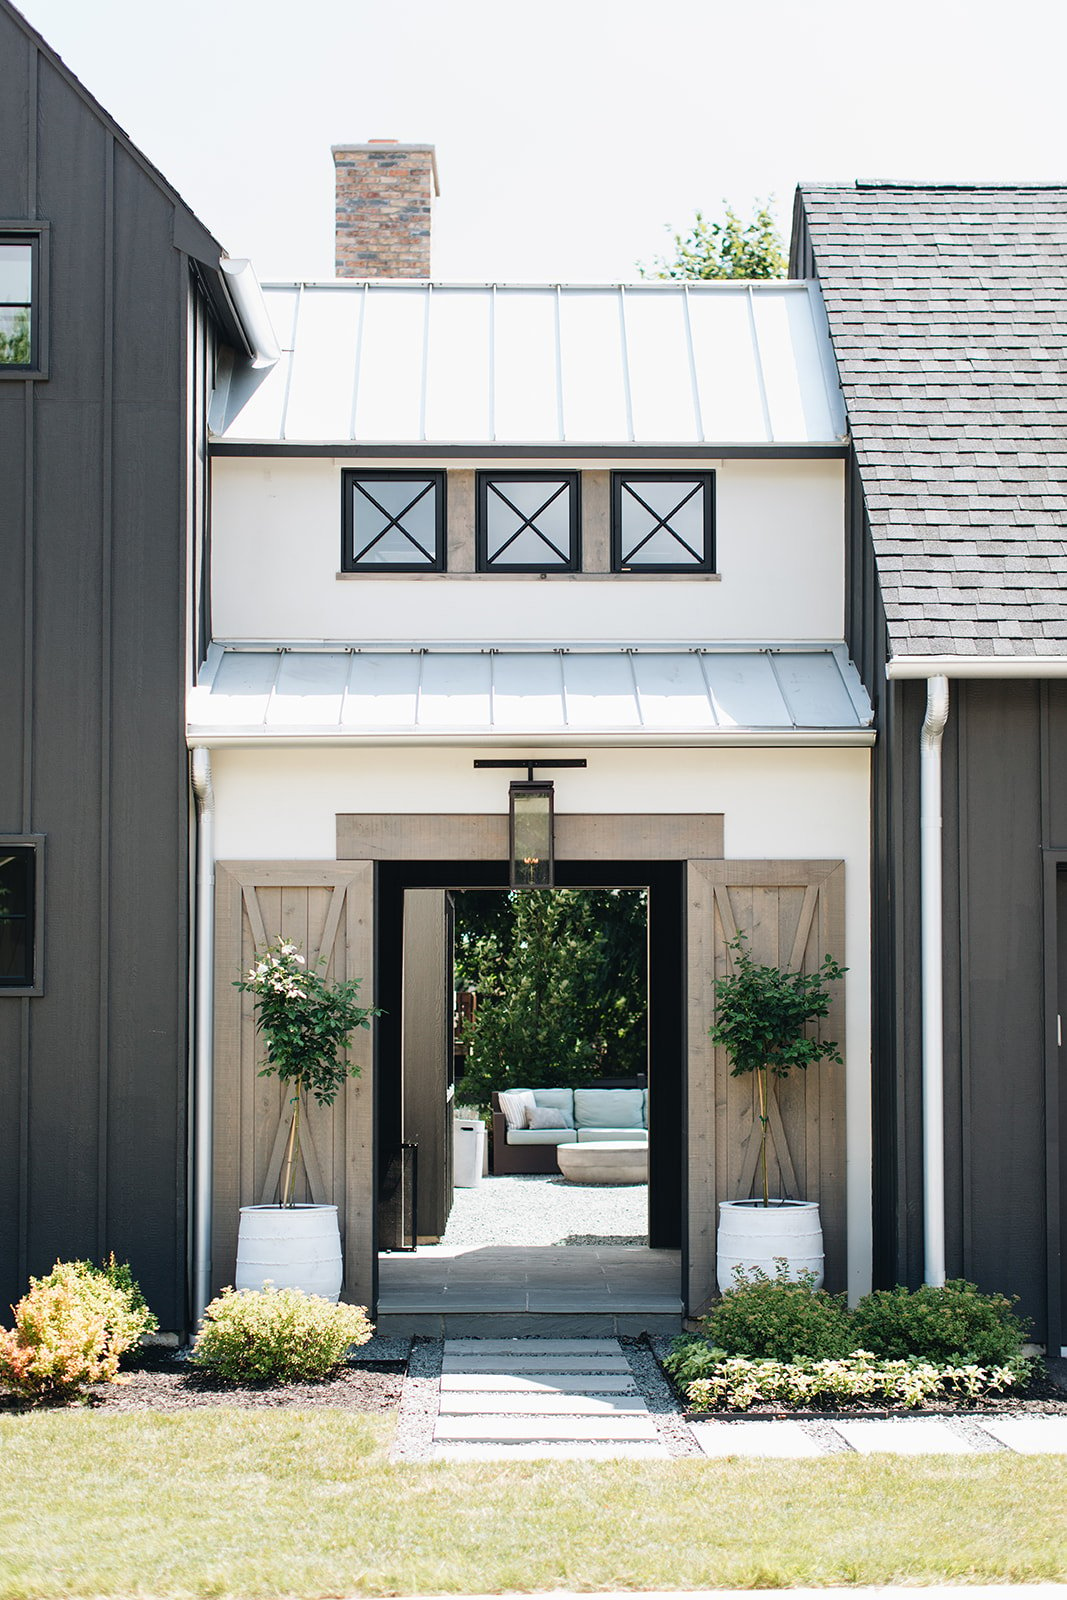 Discover the top 15 exterior house trends of 2024, from bold colors and natural materials to eco-friendly features and outdoor living spaces. Enhance your home's curb appeal and value with these emerging design trends.